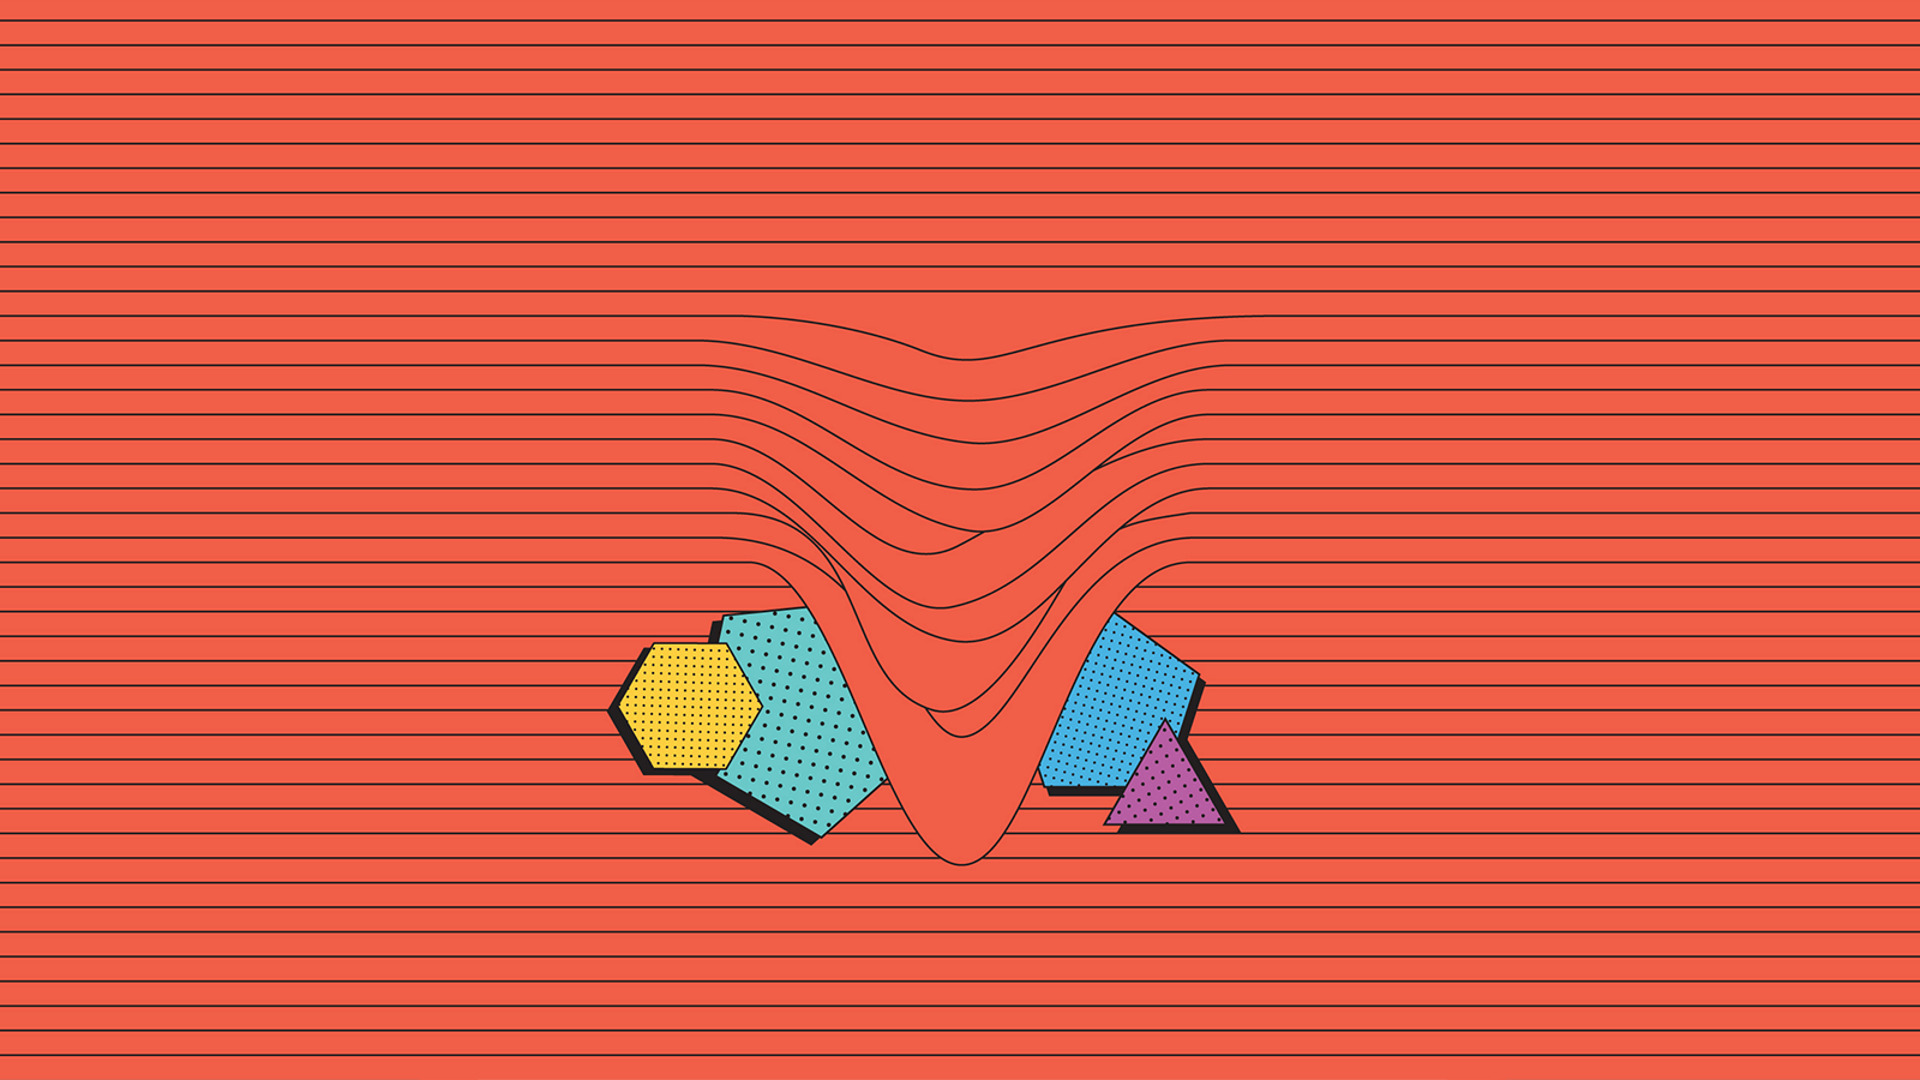 minimalism, Digital Art, Vertical Lines, Hexagon, Triangle, Red Background, Dots, Geometry, Abstract, Com Truise Wallpaper